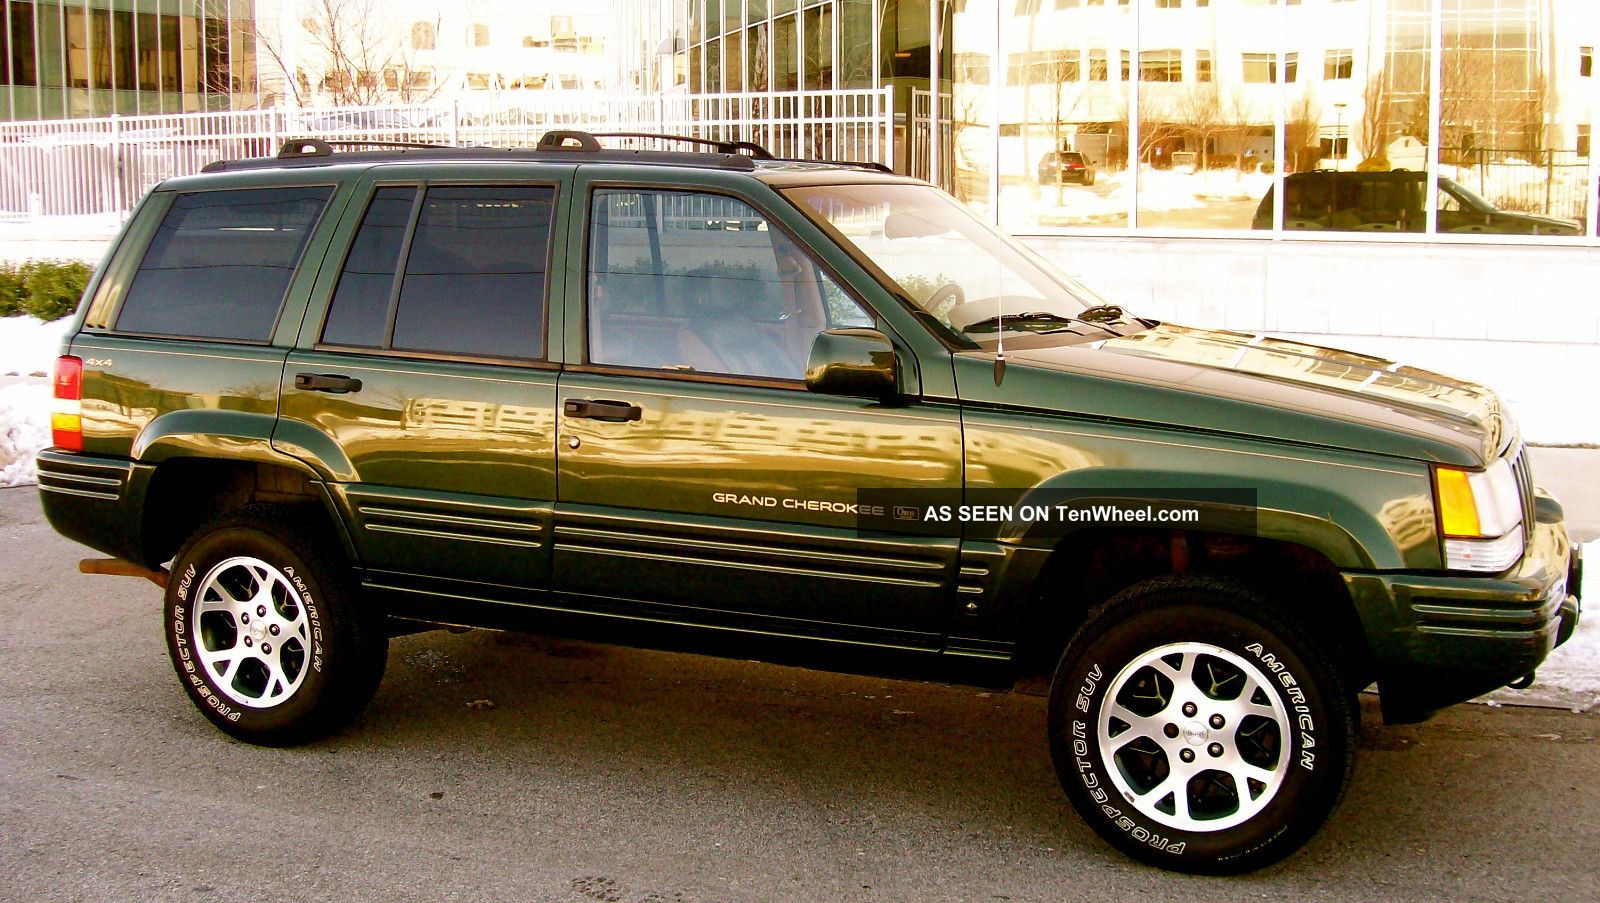 1996 Jeep grand cherokee limited edition reviews #1